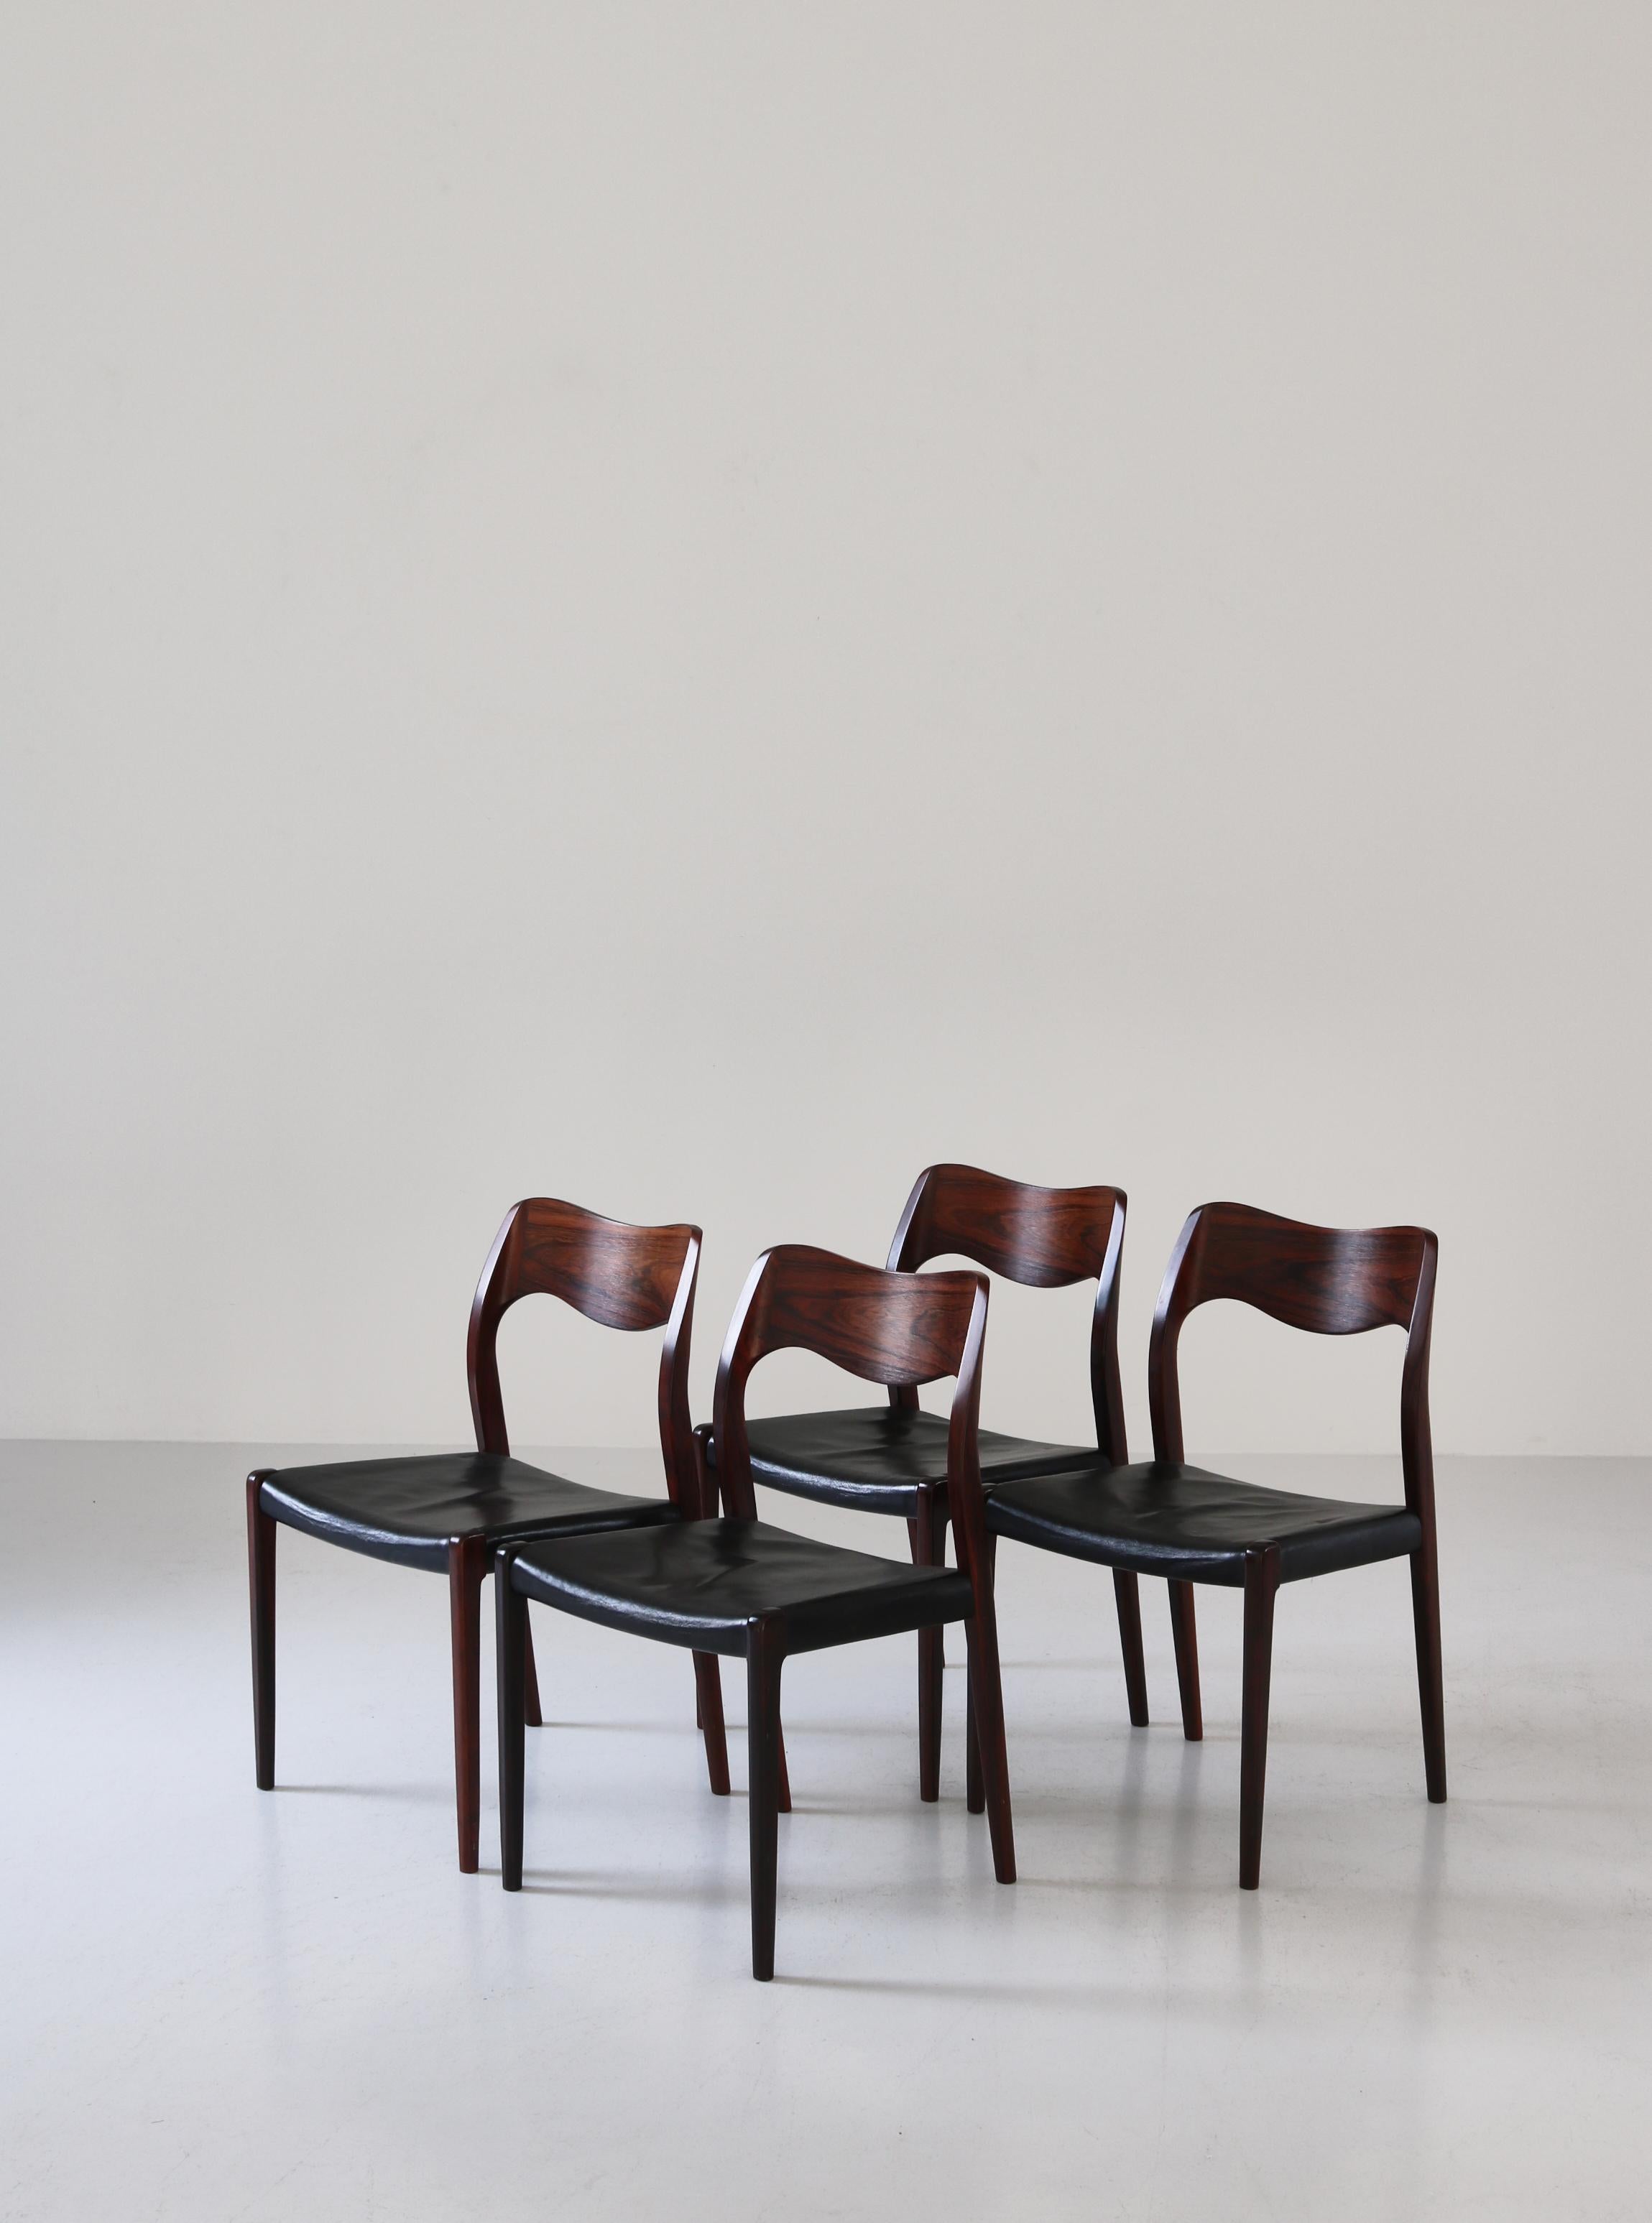 Mid-20th Century Set of Danish Modern Dining Chairs by N.O. Møller, Rosewood & Black Leather